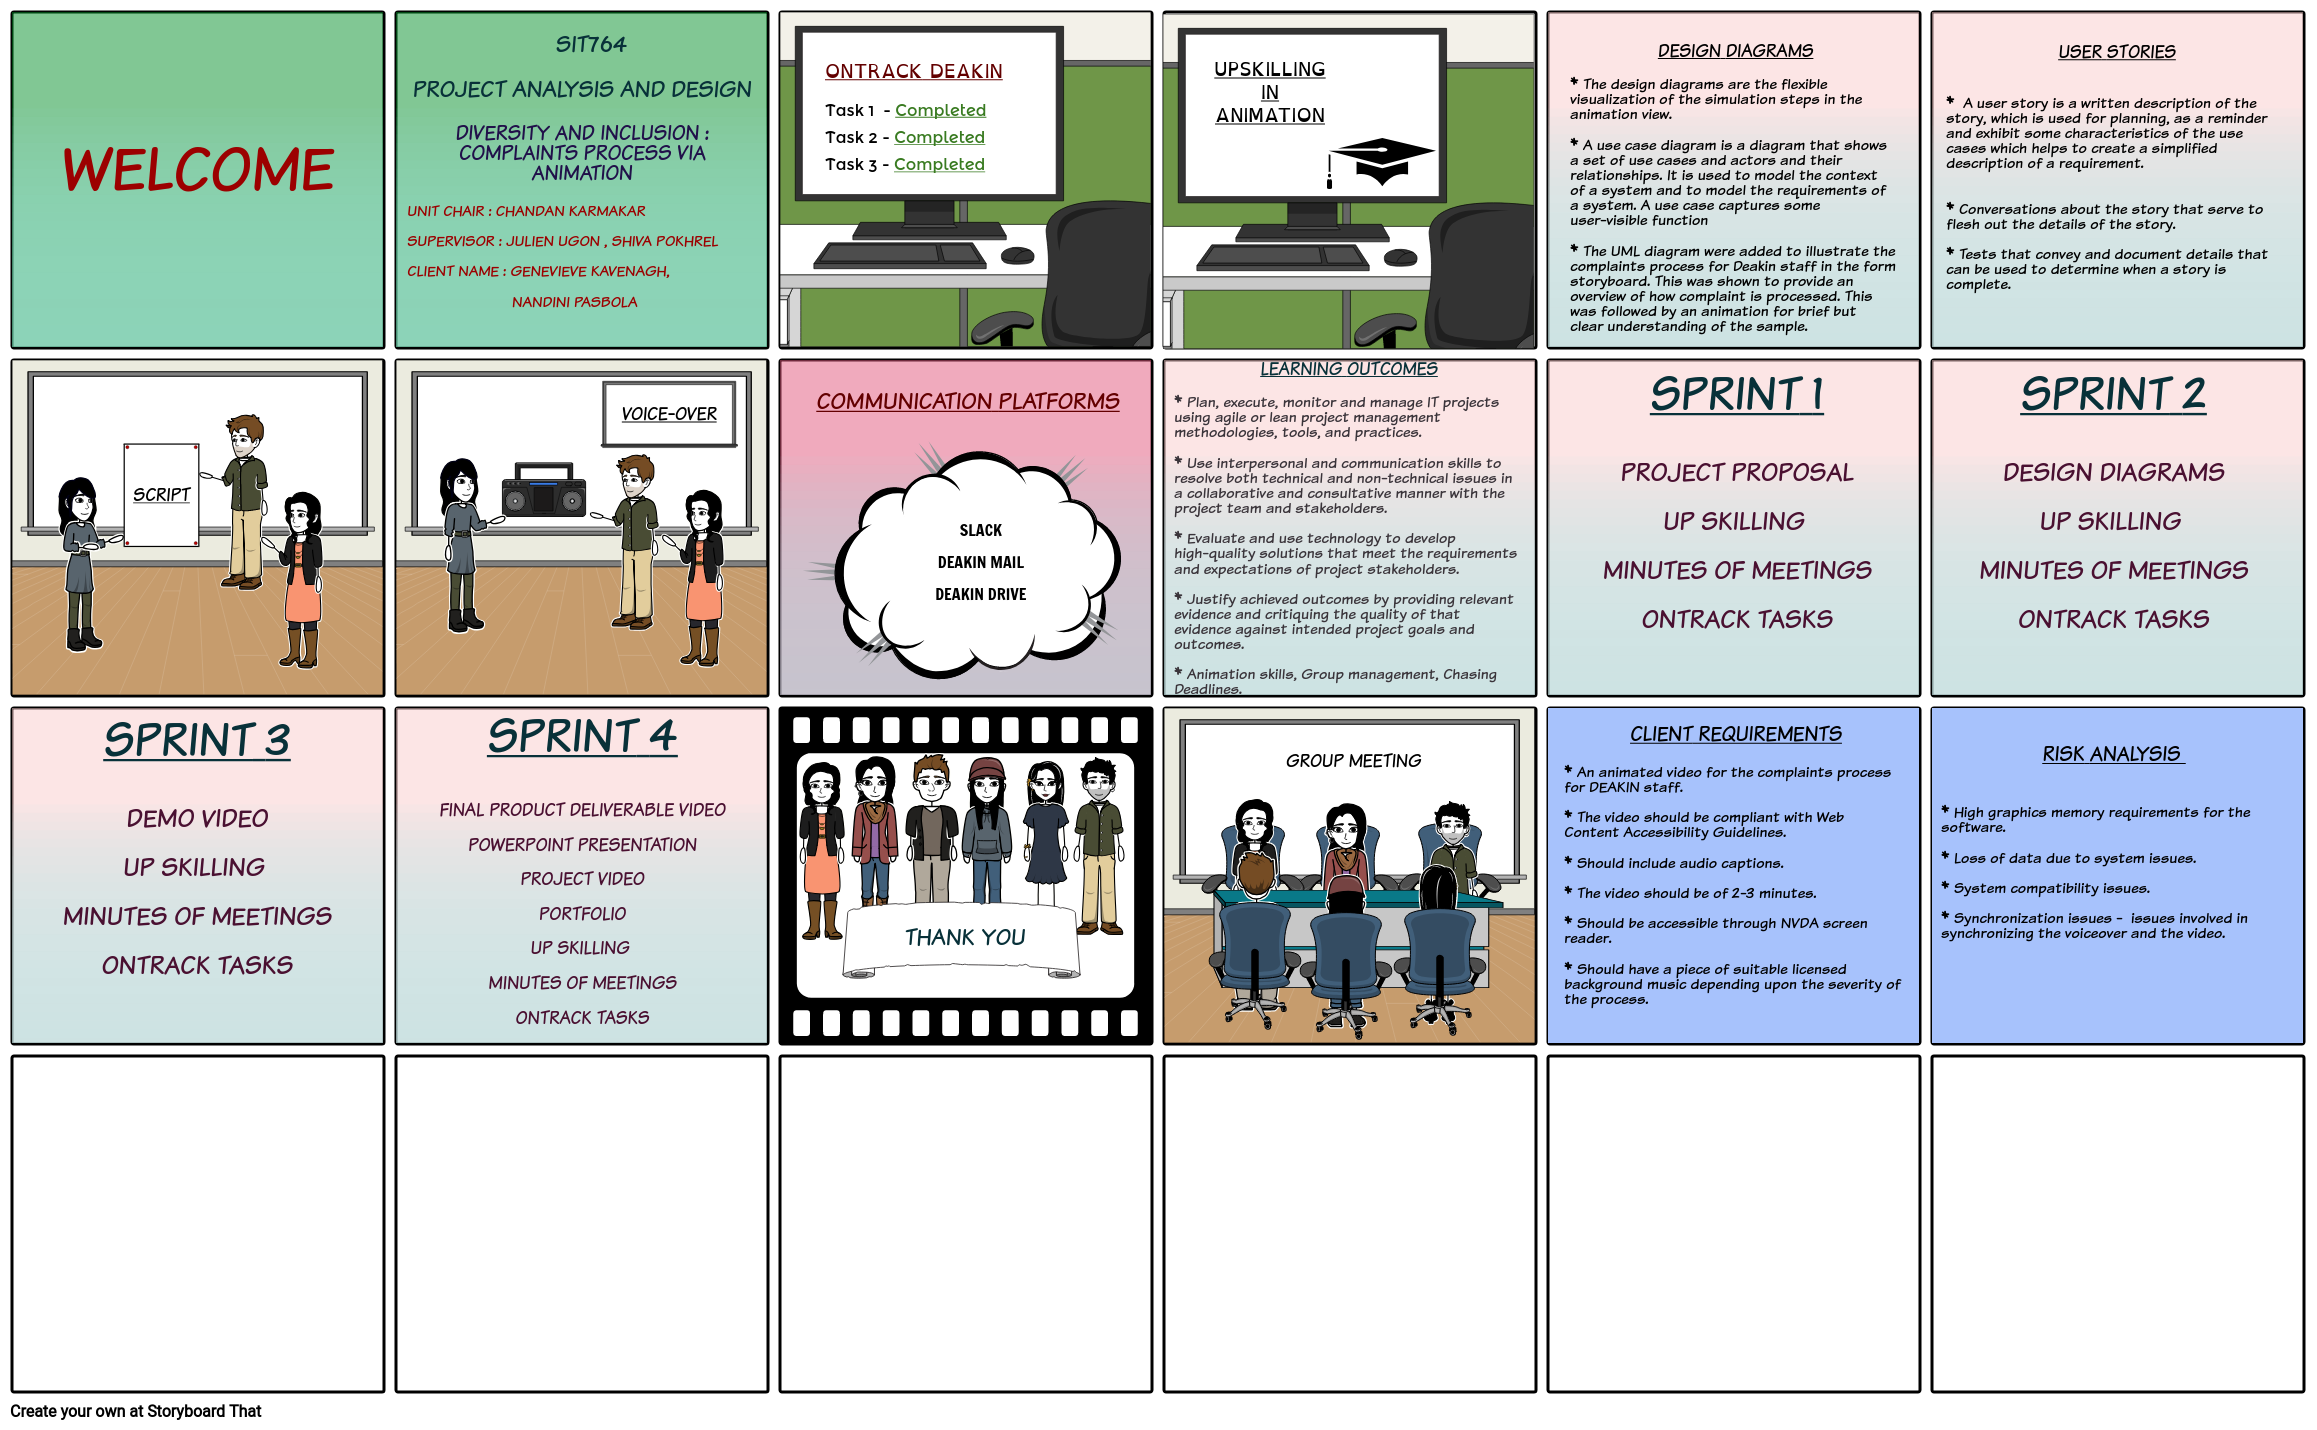 Video Presentation Storyboard by hafsa_jabeen52